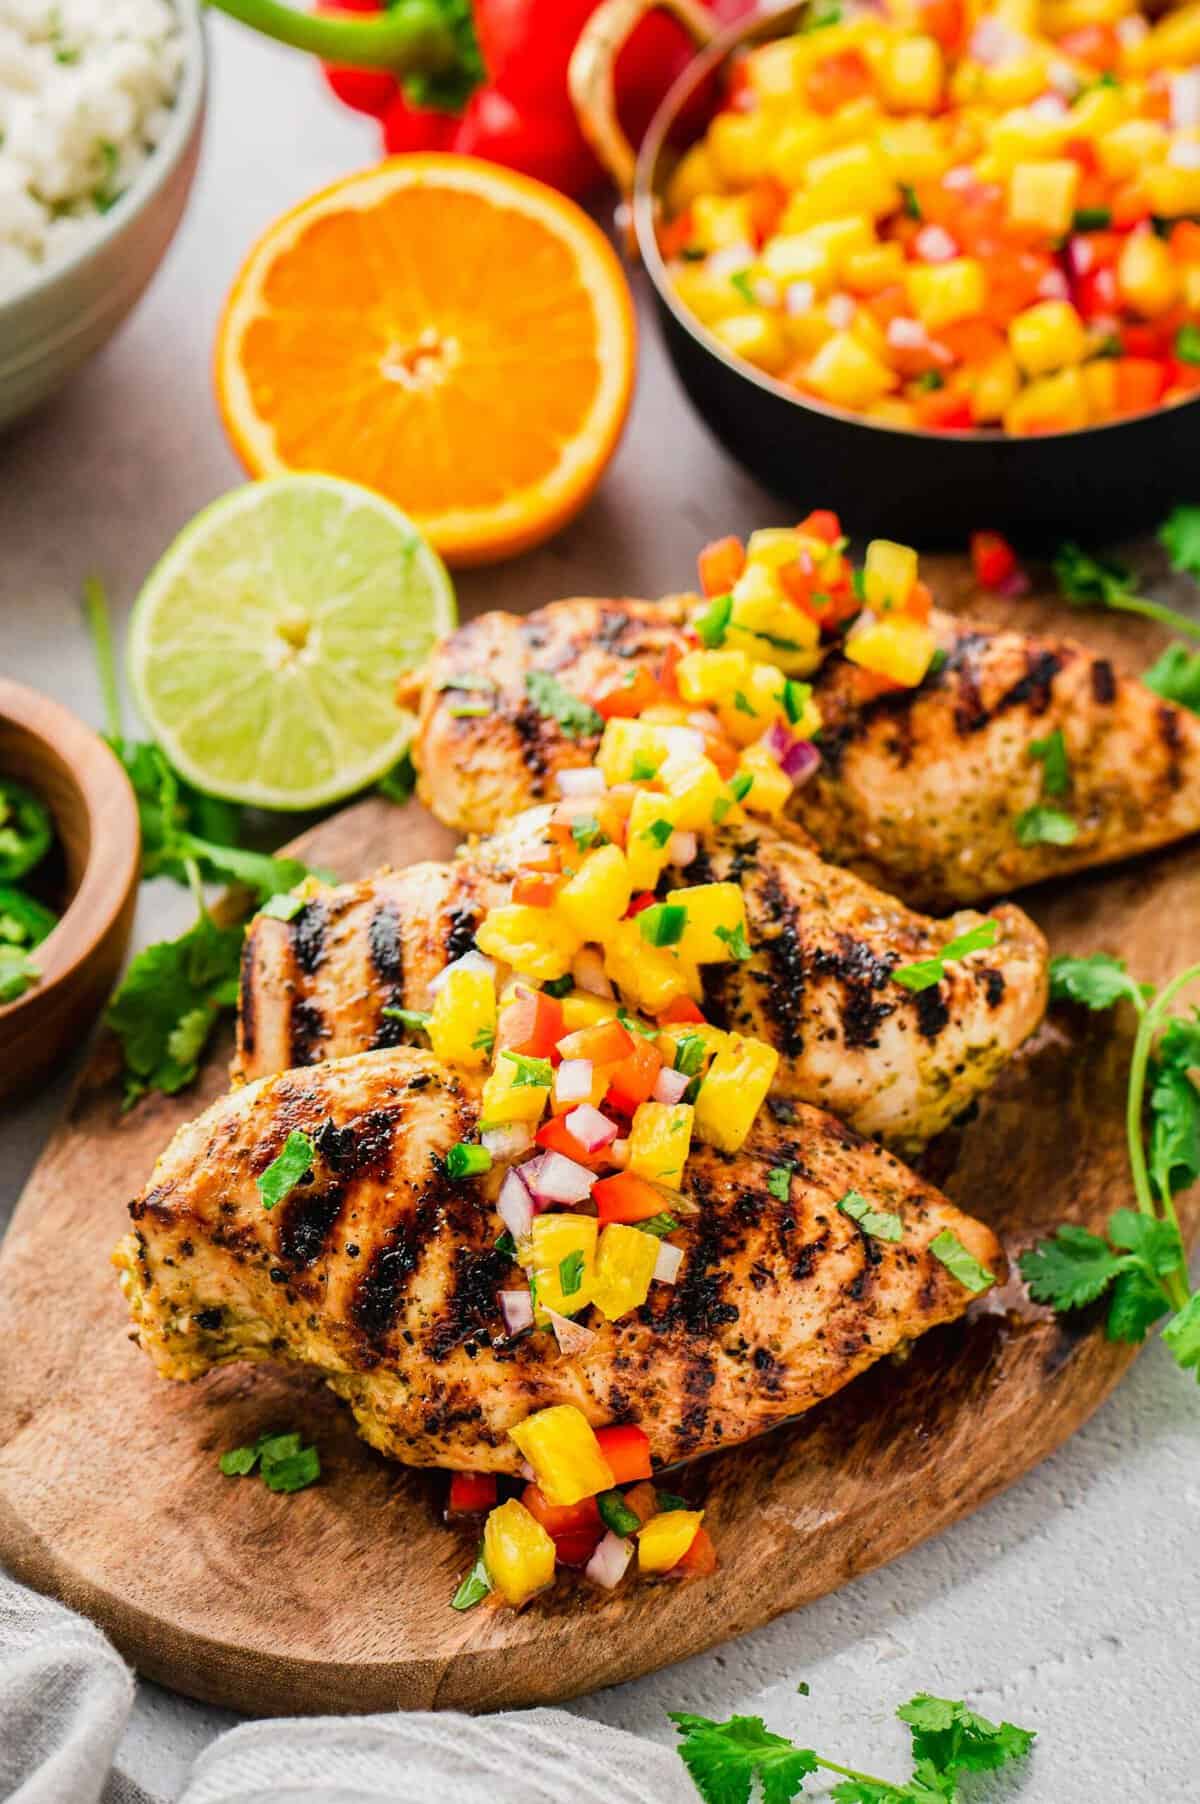 Three grilled chicken breasts topped with pineapple salsa